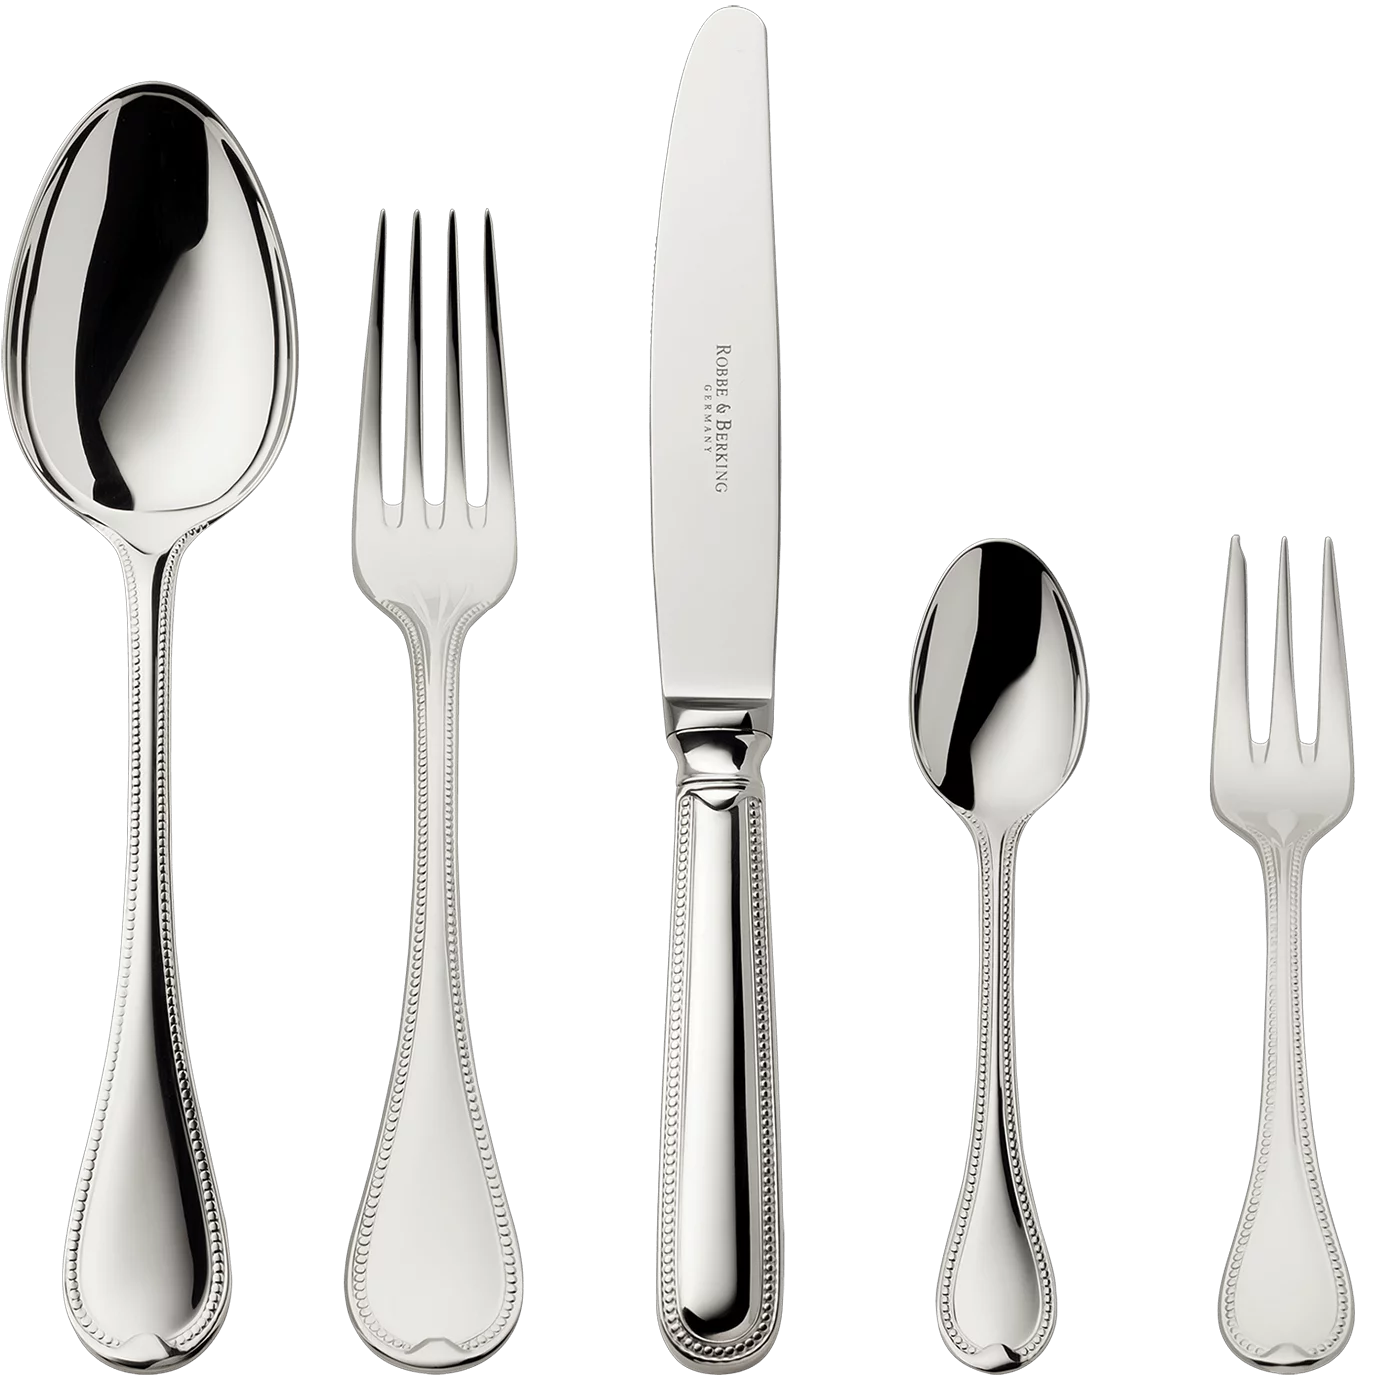 Französisch-Perl 5-piece place setting (925 Sterling Silver)